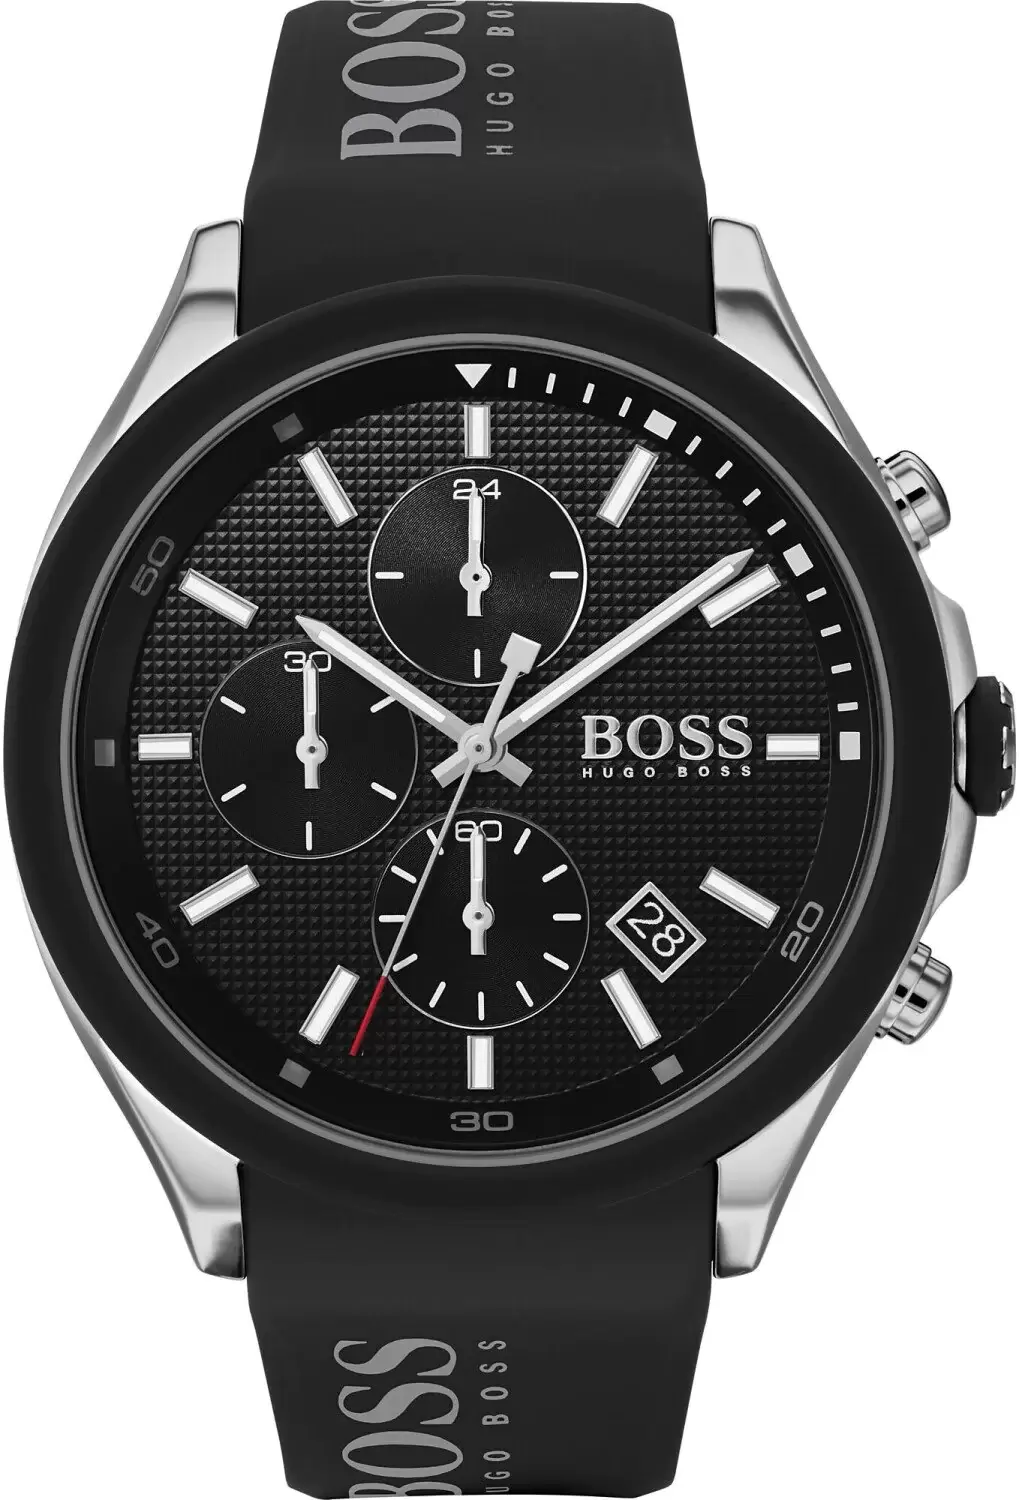 Guides for individuals looking to purchase Hugo Boss watches as gifts ...